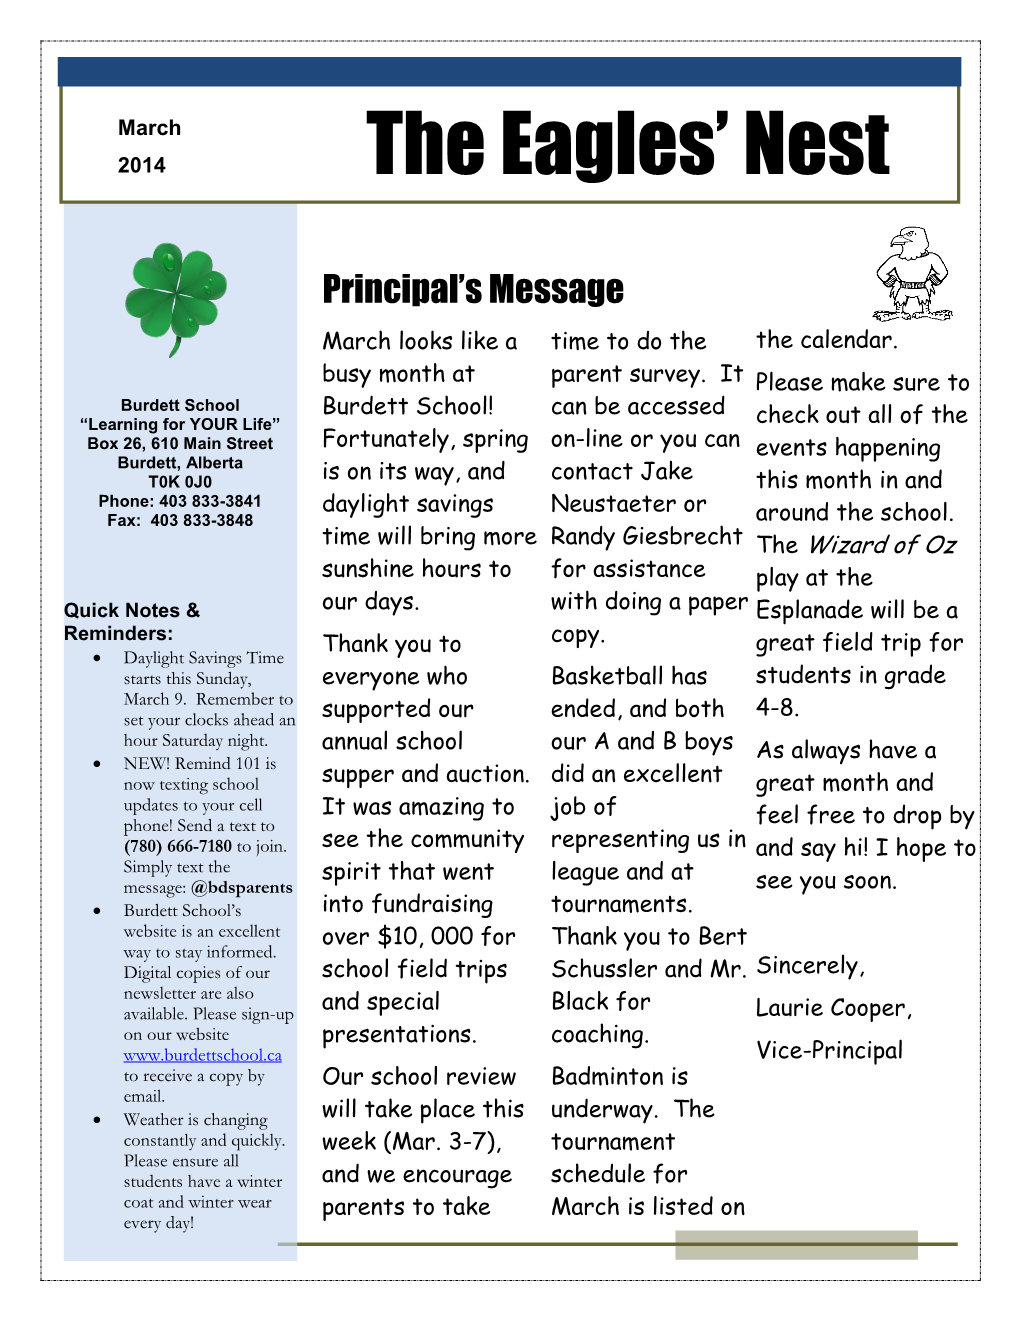 The Eagles' Nest